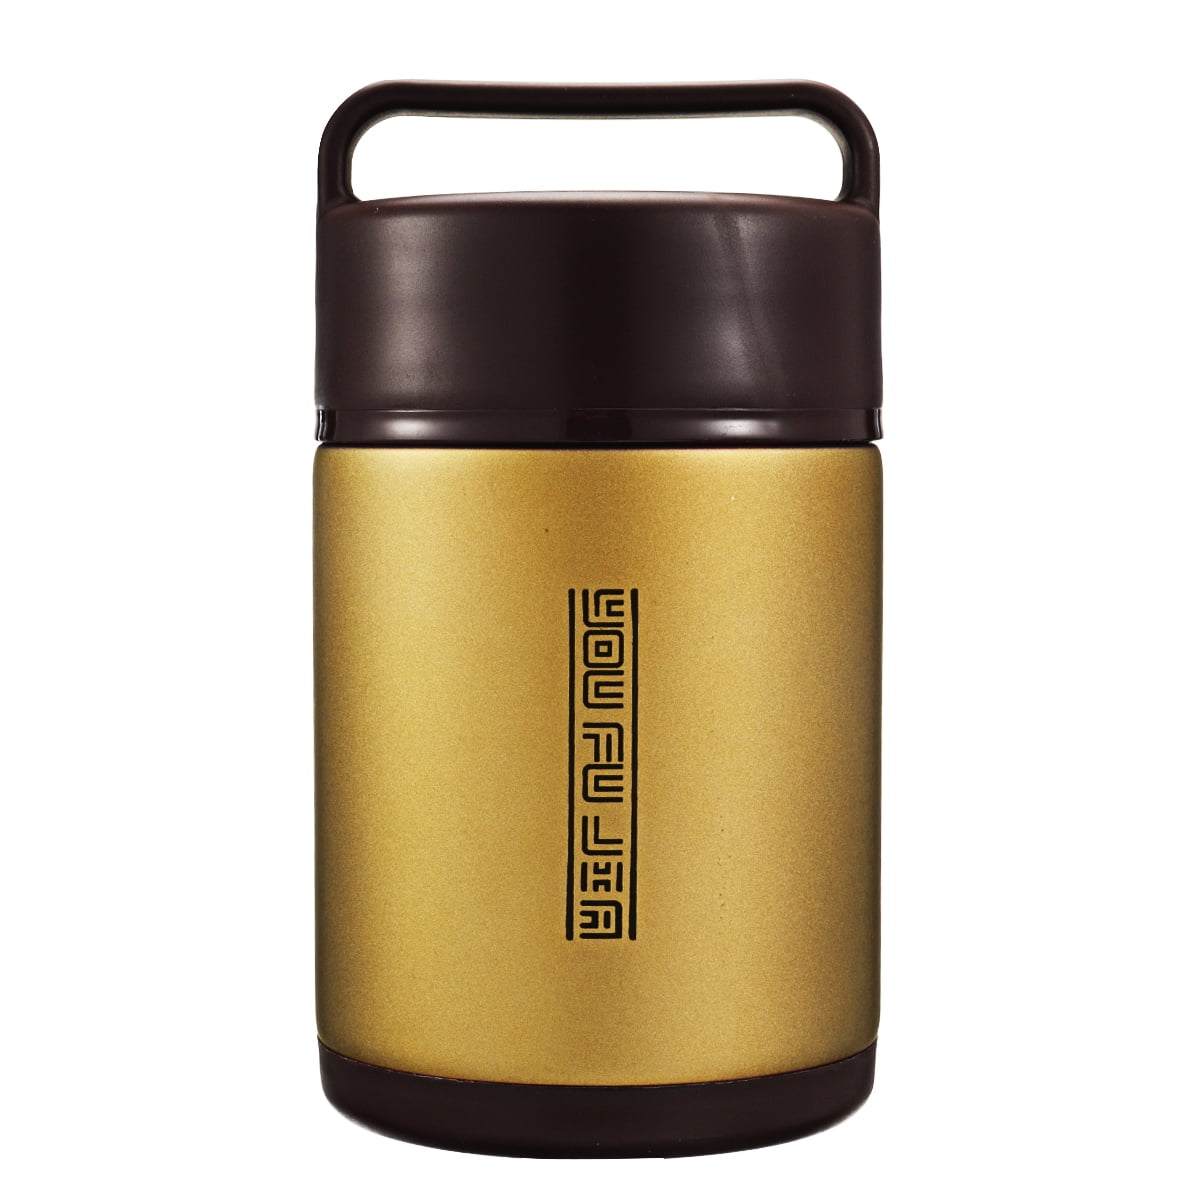 insulated thermos for food